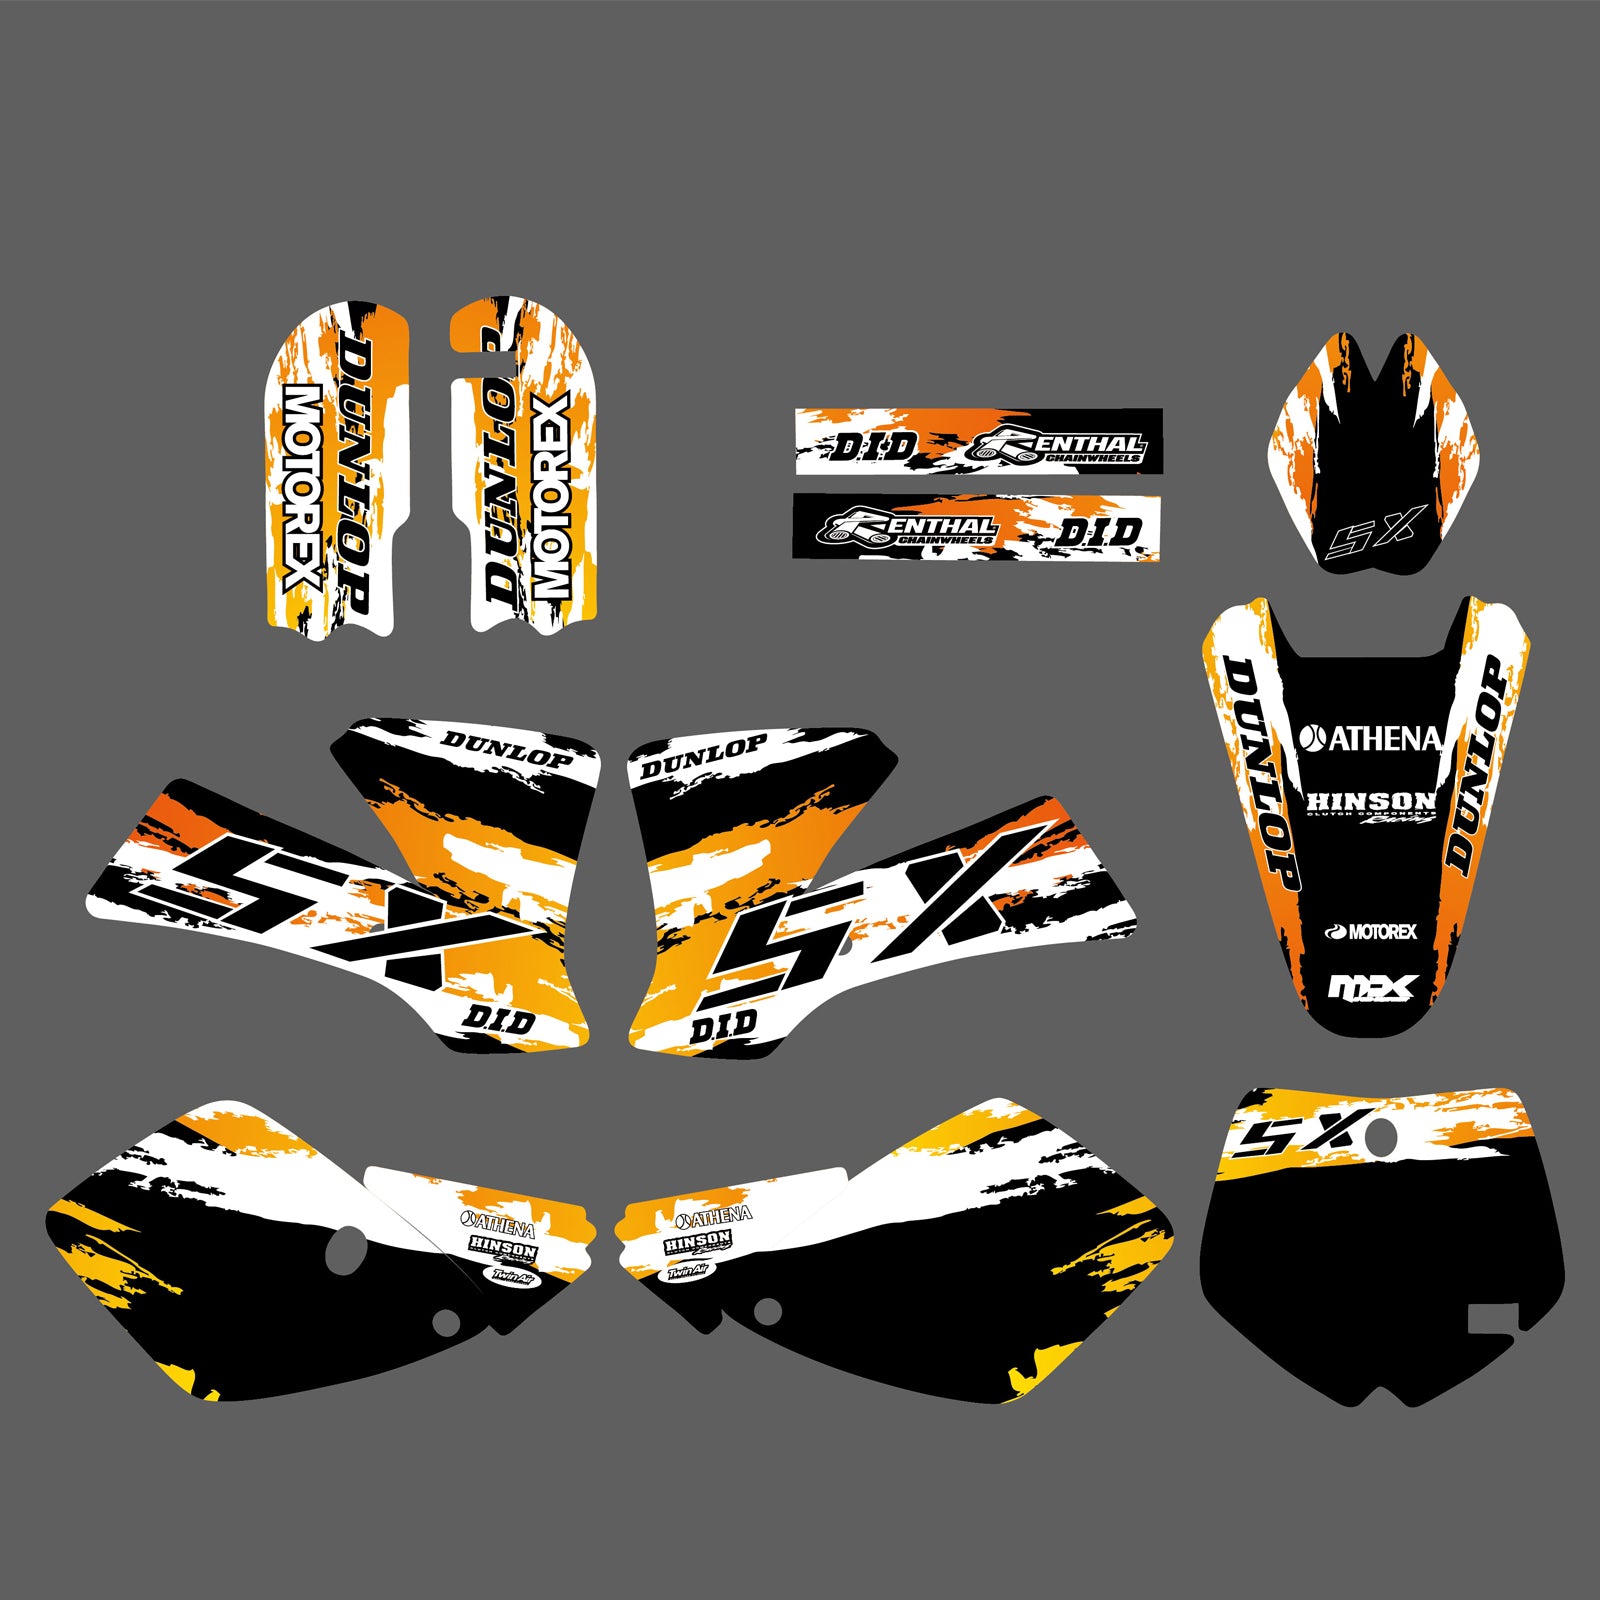 Motorcycle Graphics & Background Decals Kits for KTM SX65 02-08